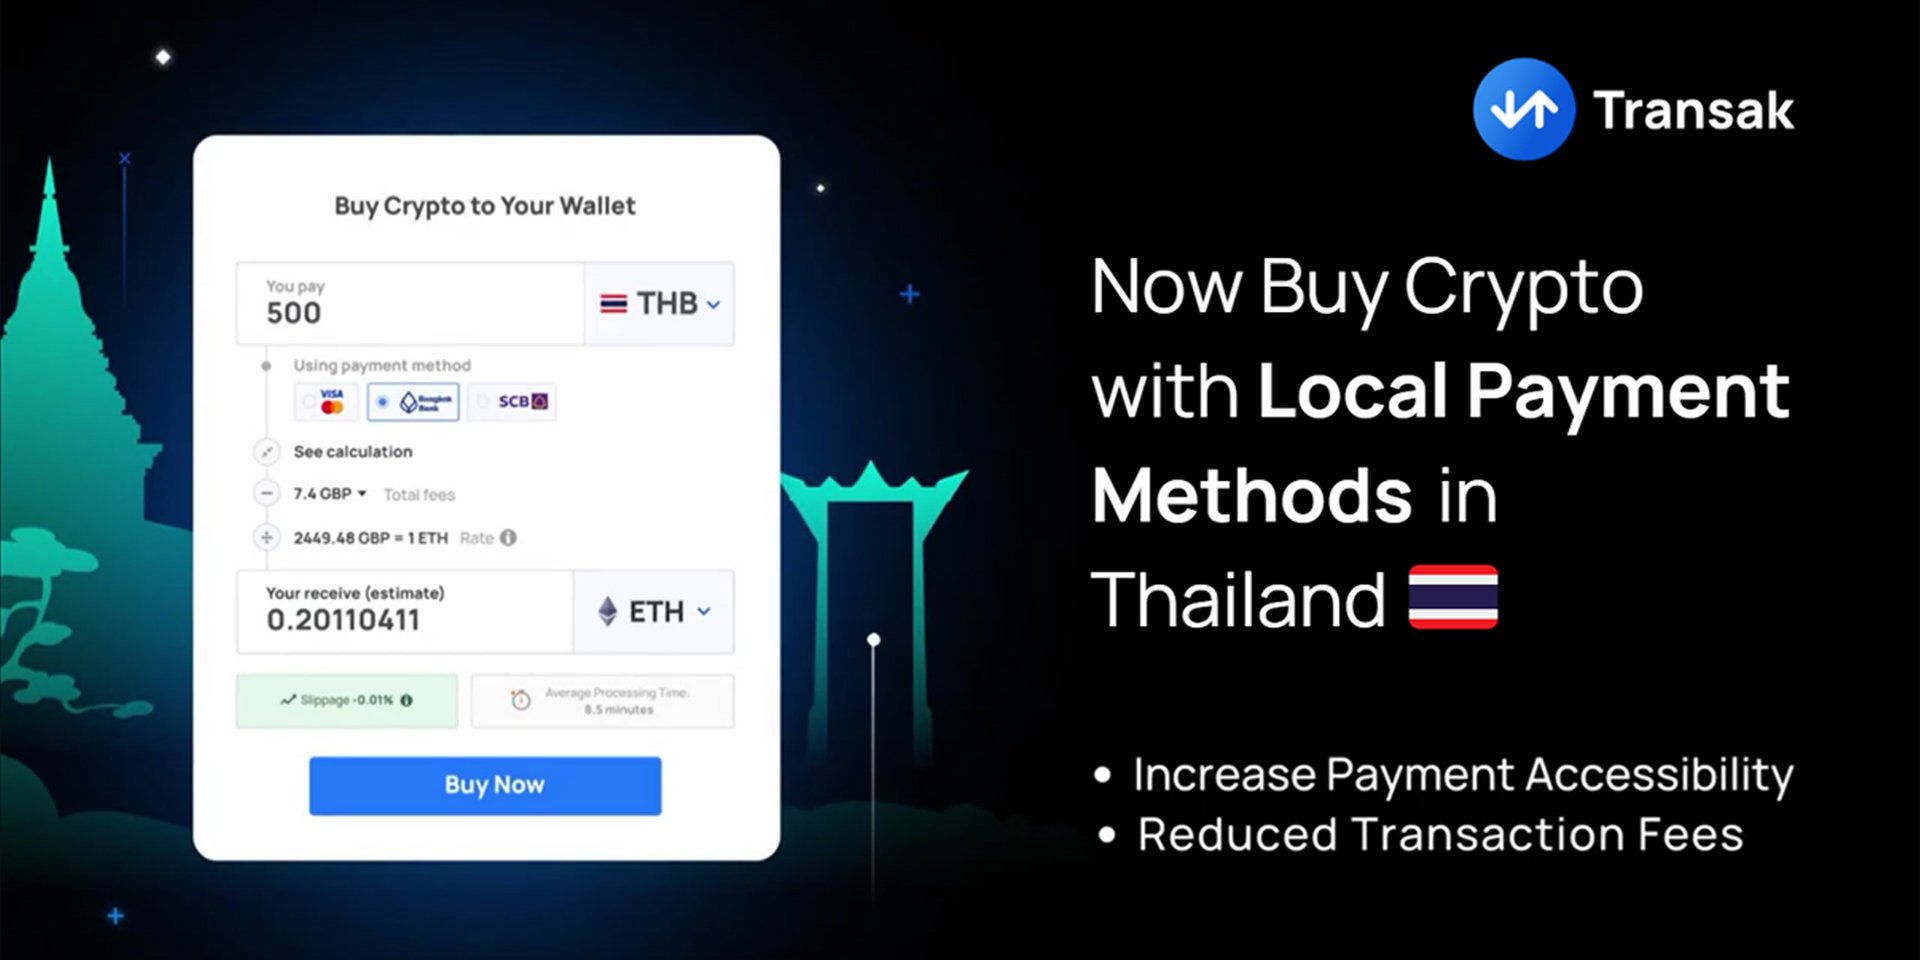 Now Buy Crypto with Local Payment Methods in Thailand